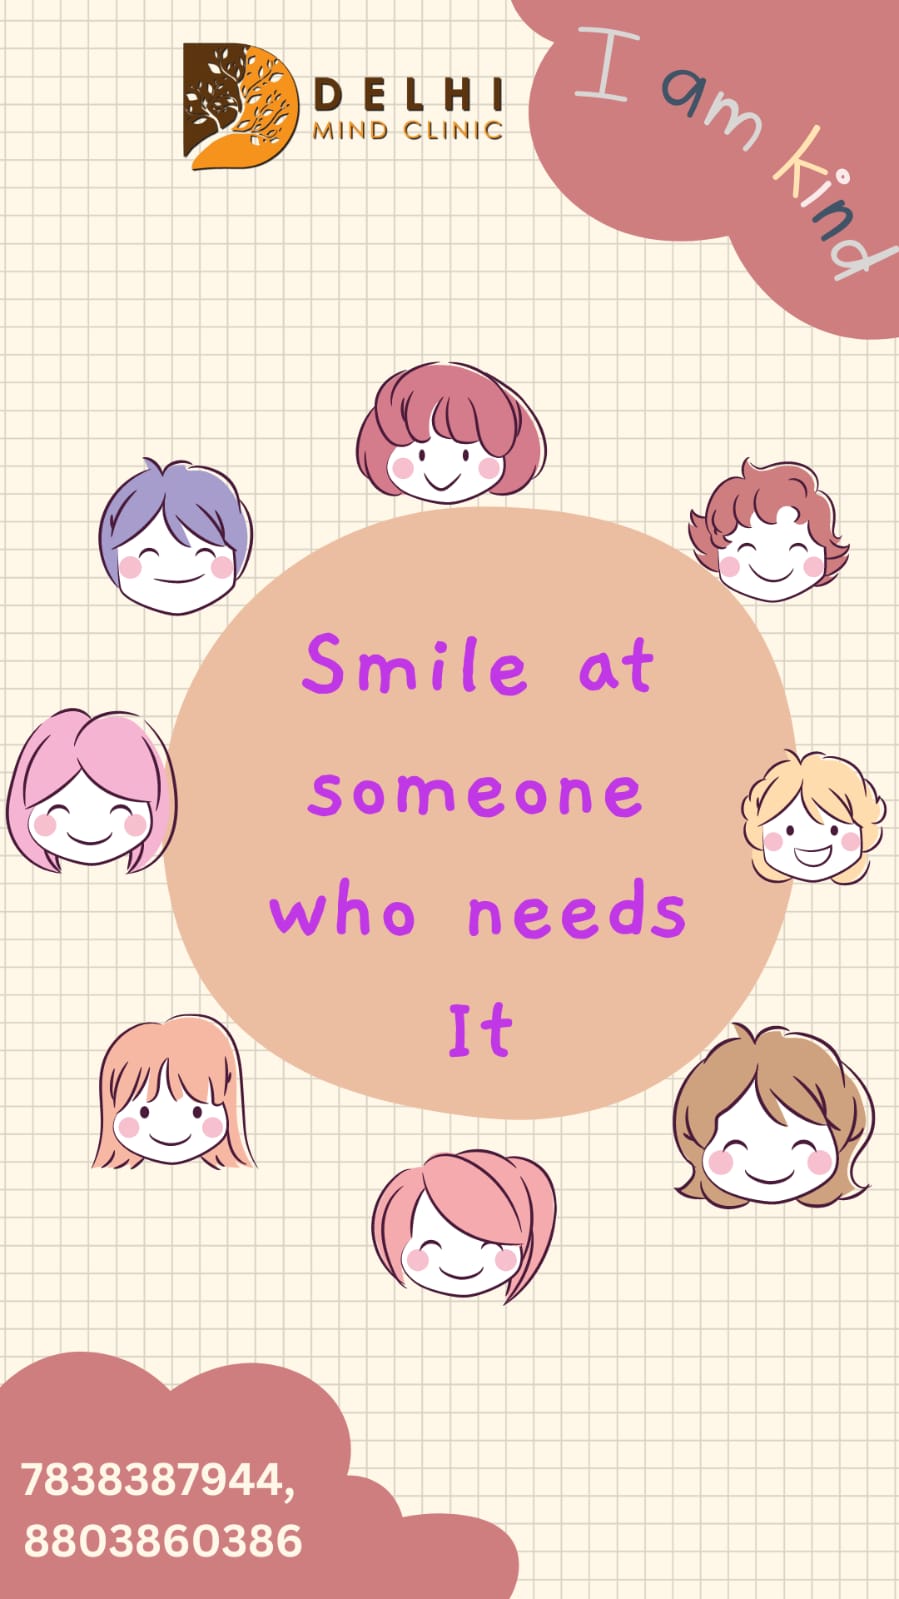 Smile at someone who needs it